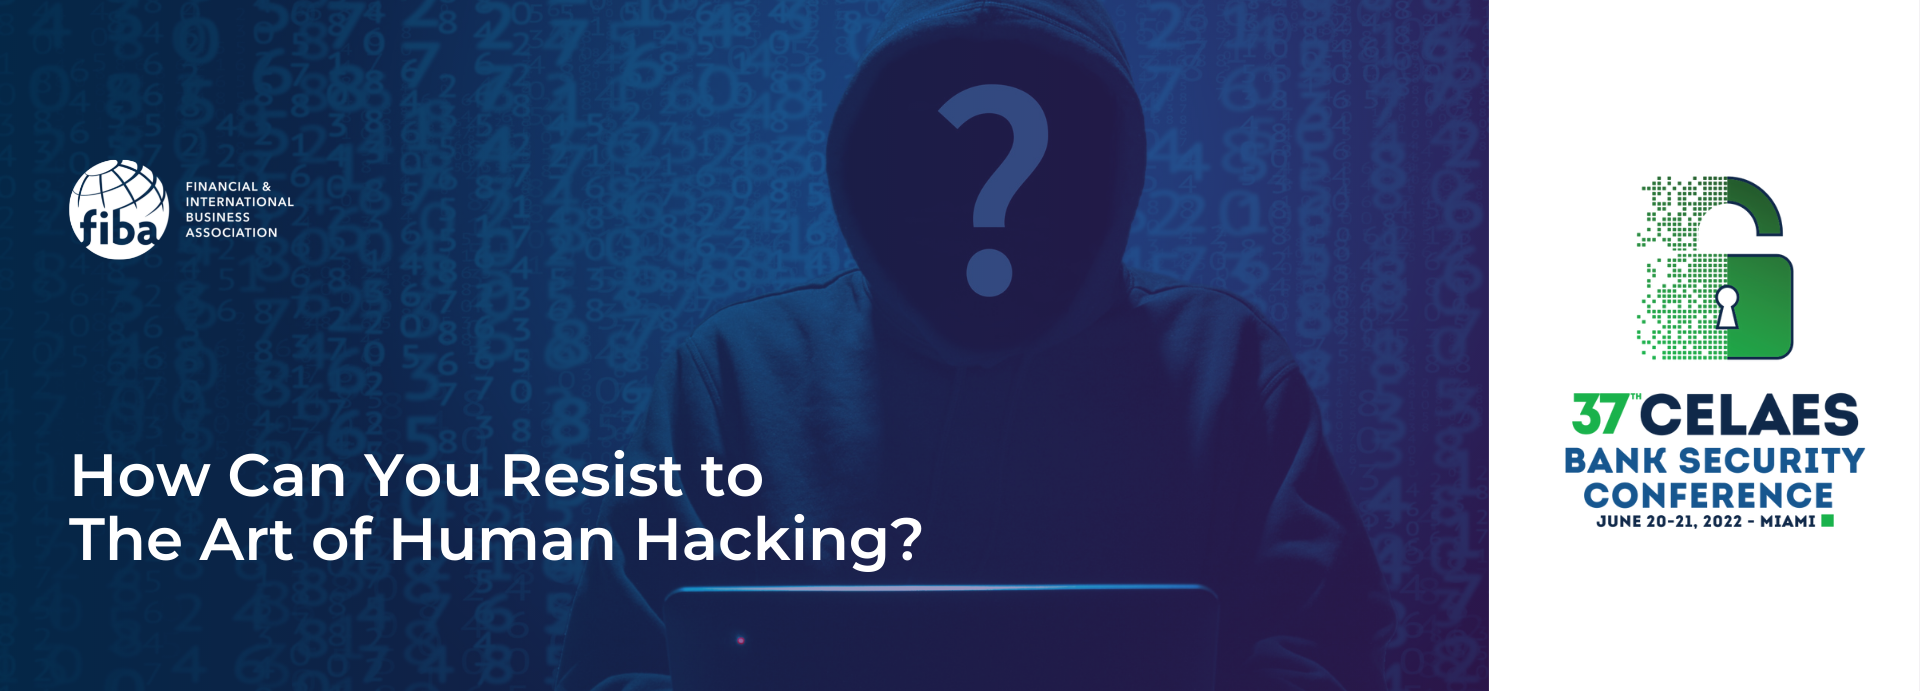 How Can You Resist to The Art of Human Hacking?